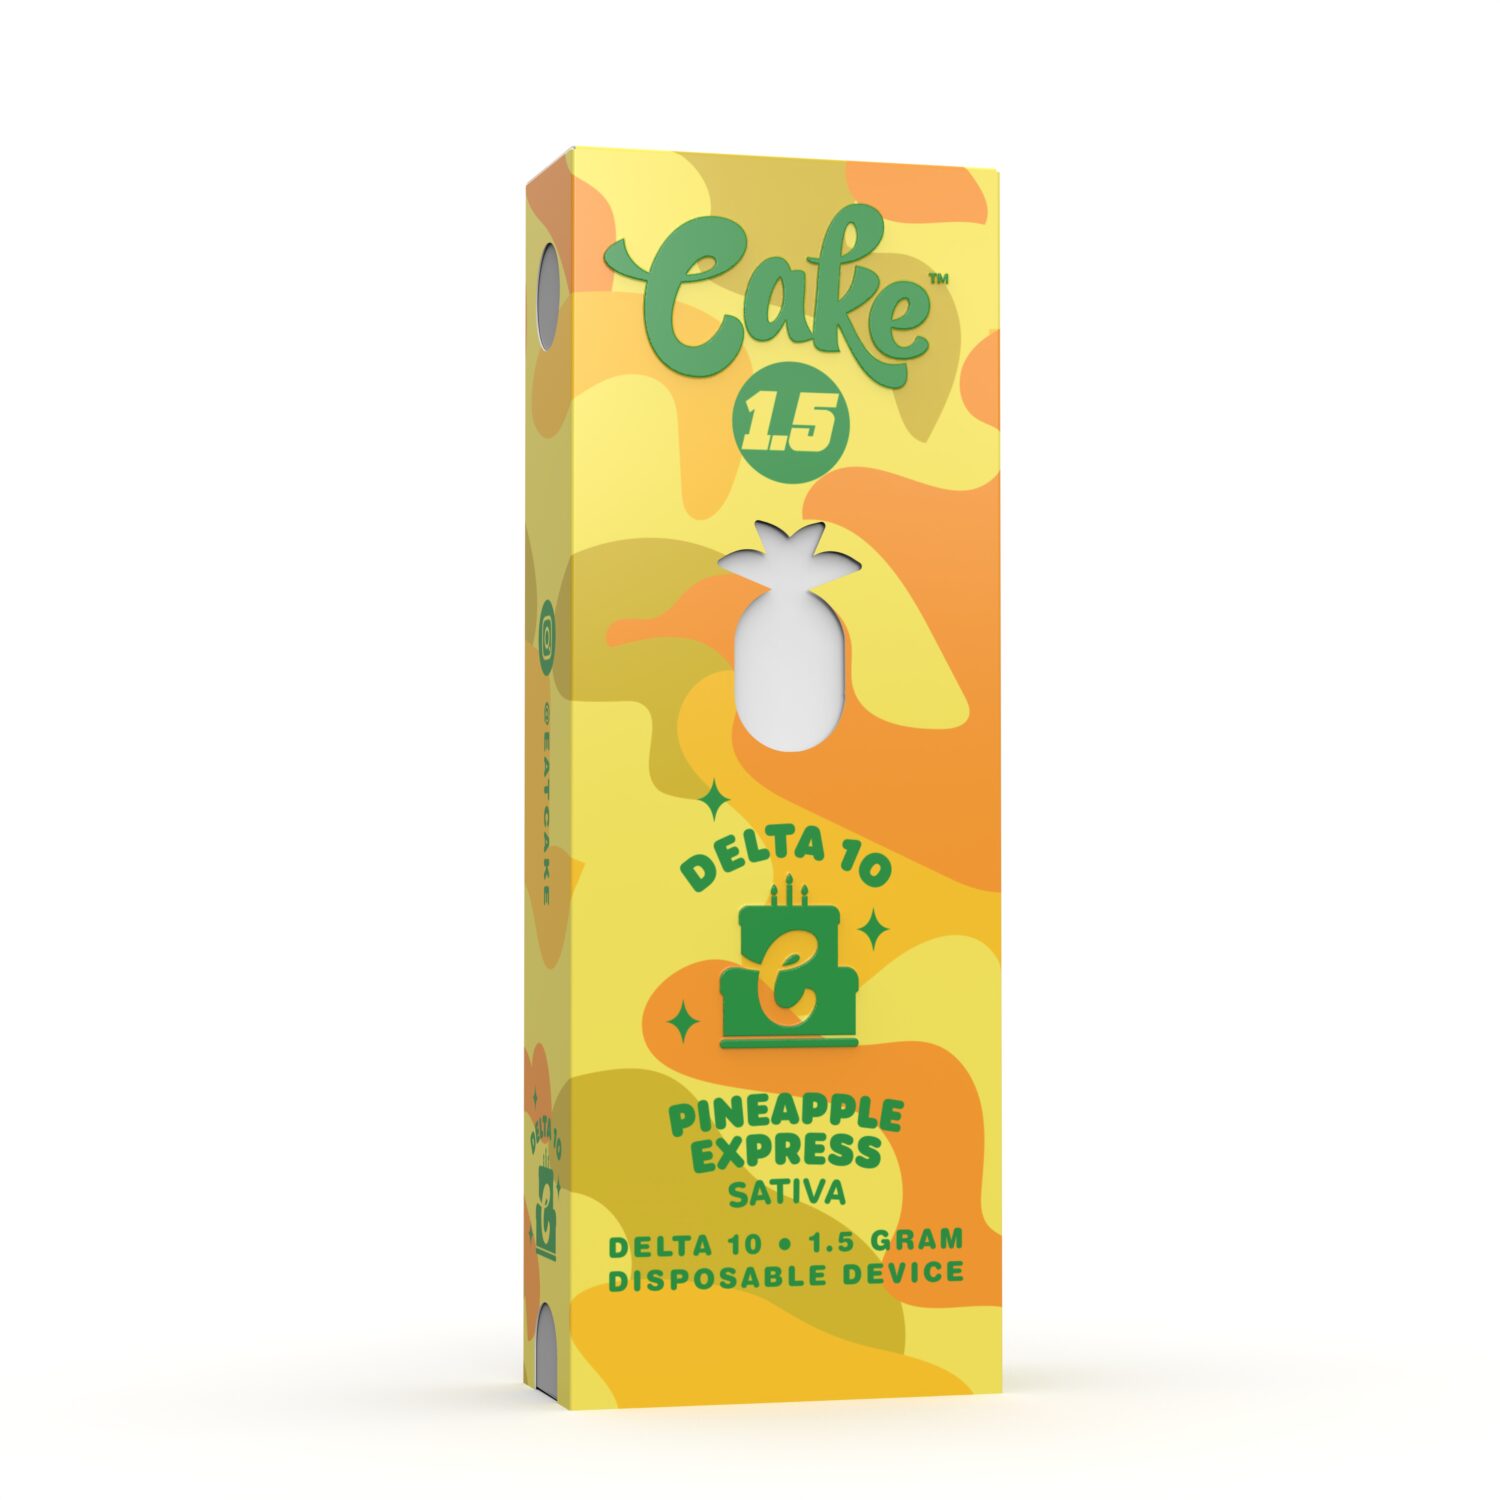 Cake-Delta-10-Disposable-1.5g-Pineapple-Express-scaled-1.jpg